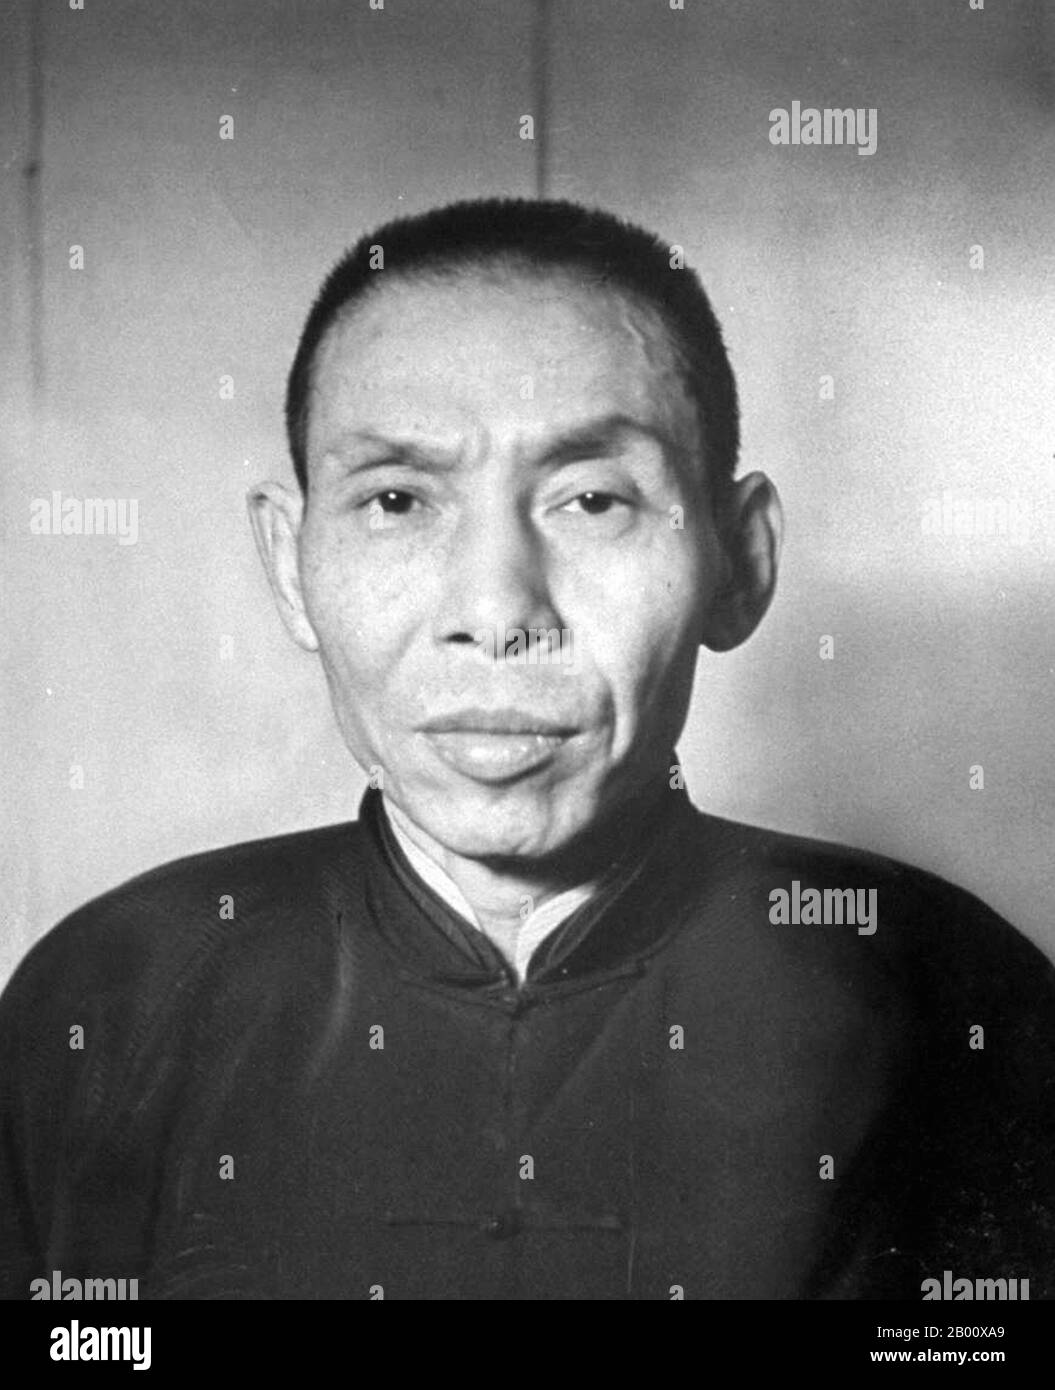 China: Shanghai 'Green Gang' mobster Du Yuesheng or 'Big Ears Du' (1887-1951).  Du Yuesheng (Tu Yüeh-sheng), commonly known as 'Big-Ears Du' (1887–1951) was a Chinese gangster who spent much of his life in Shanghai. He was a key supporter of the Kuomintang (KMT; aka Nationalists) and Chiang Kai-shek in their battle against the Communists during the 1920s, and was a figure of some importance during the Second Sino-Japanese War. After the Chinese Civil War and the KMT's retreat to Taiwan, Du went into exile in Hong Kong and remained there until his death in 1951. Stock Photo